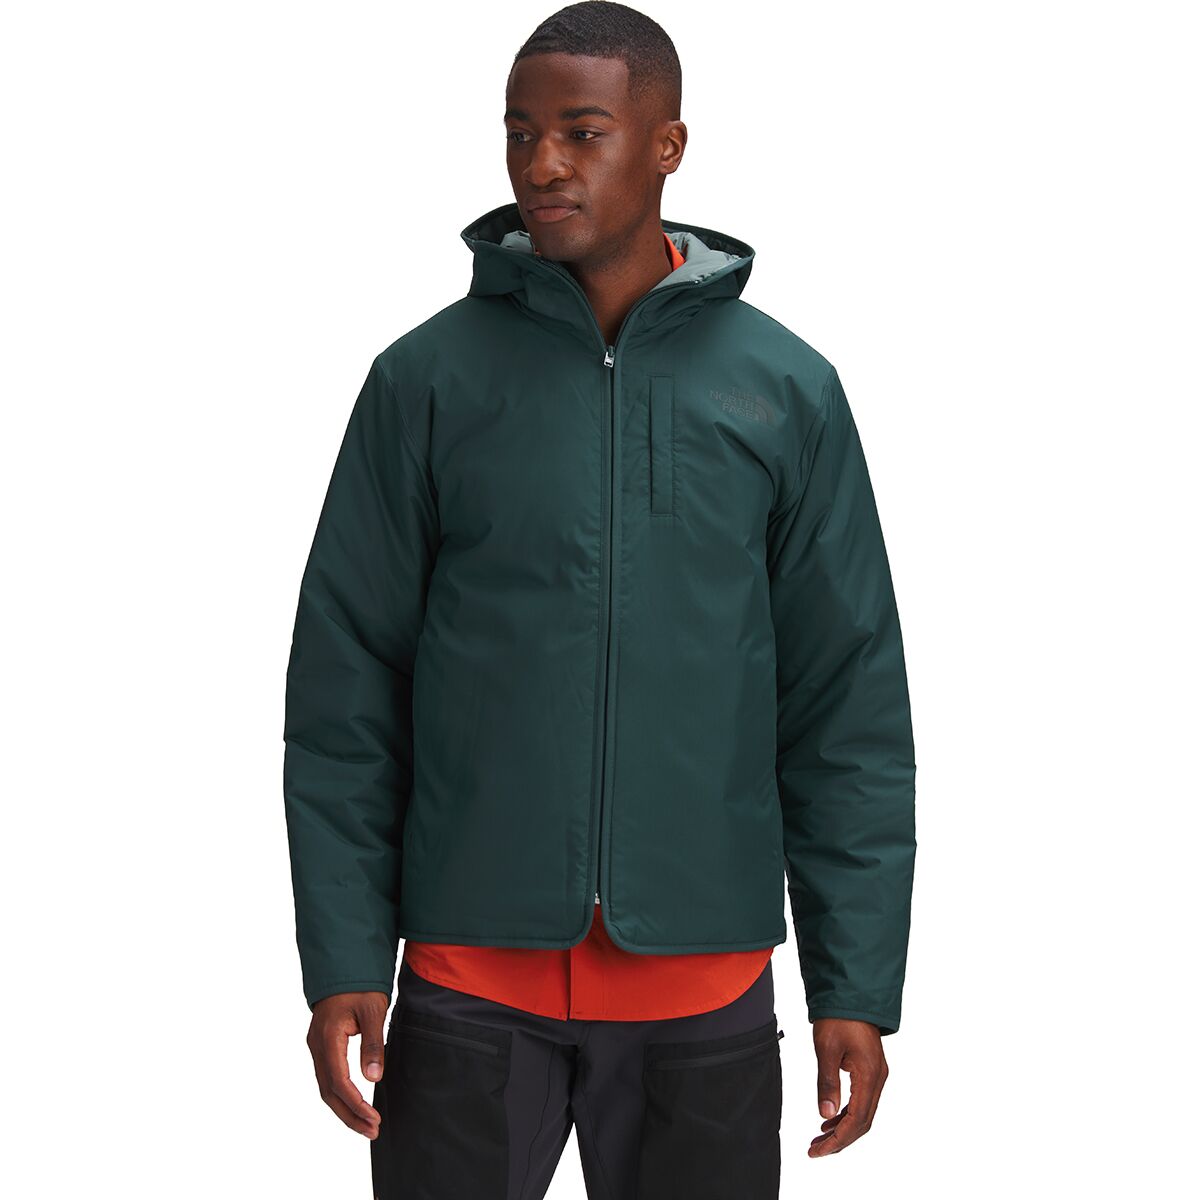 Standard Insulated Jacket - Men's by The North Face | US-Parks.com